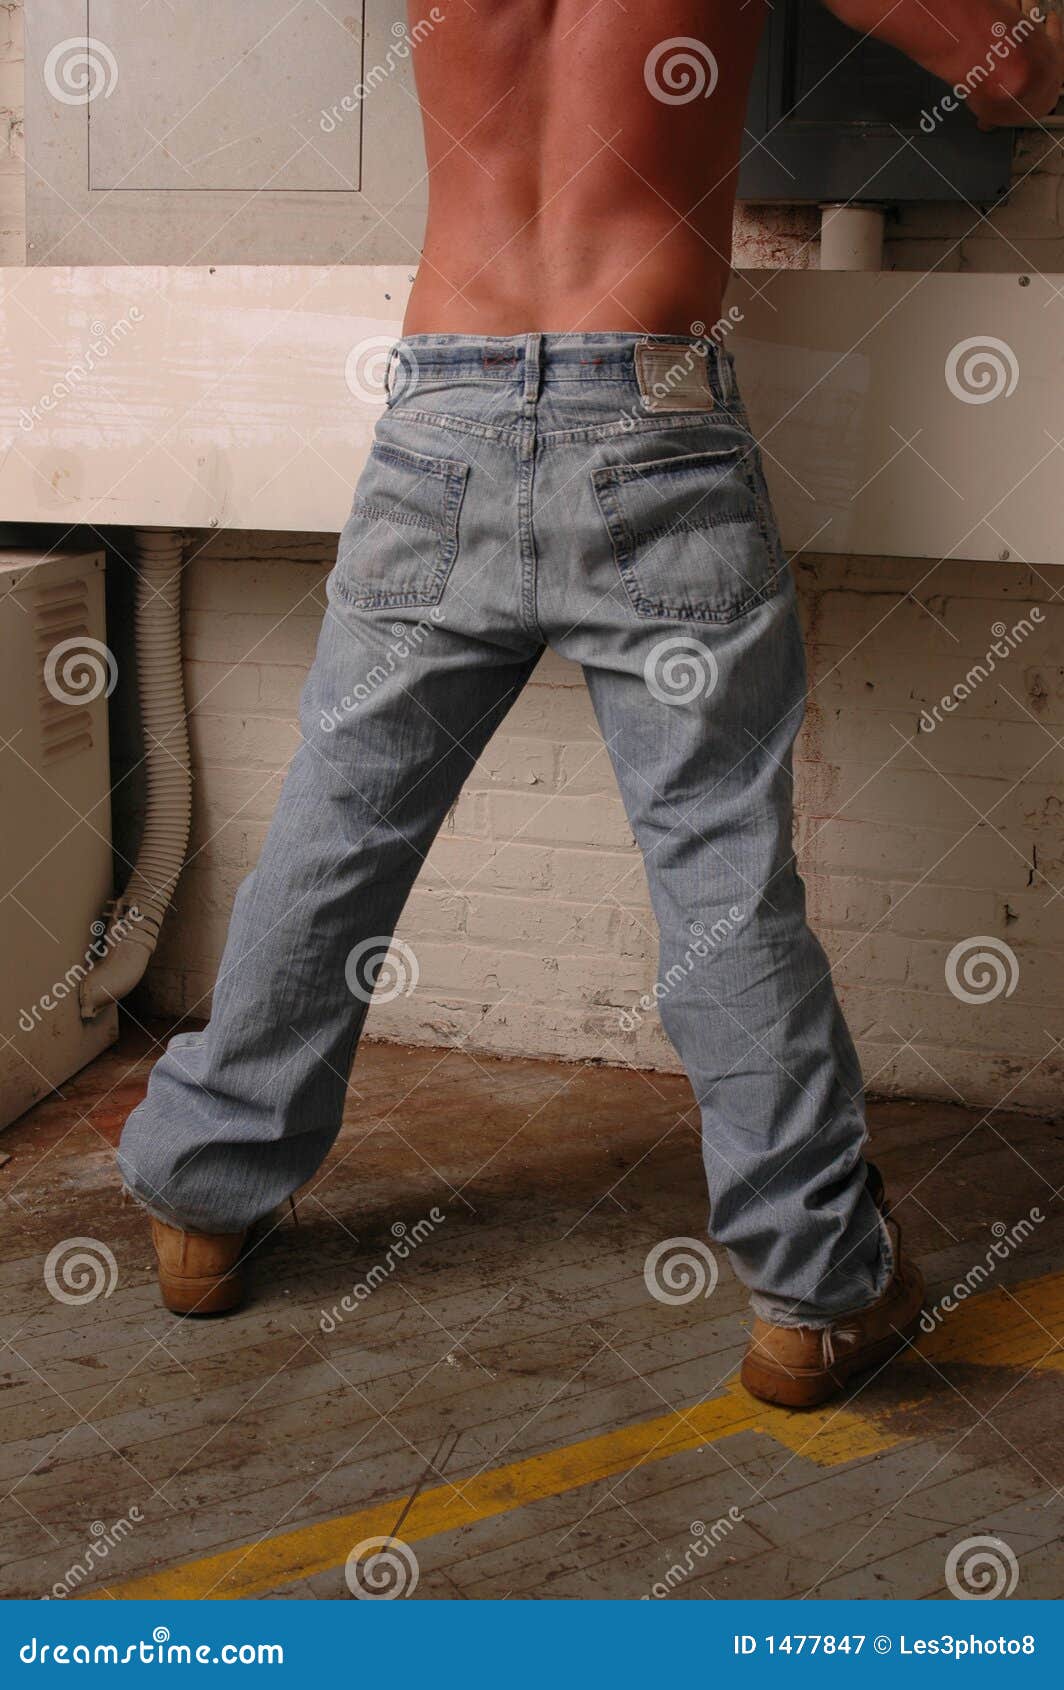 Male Muscle In Jeans Rear View Stock Image Cartoondealer